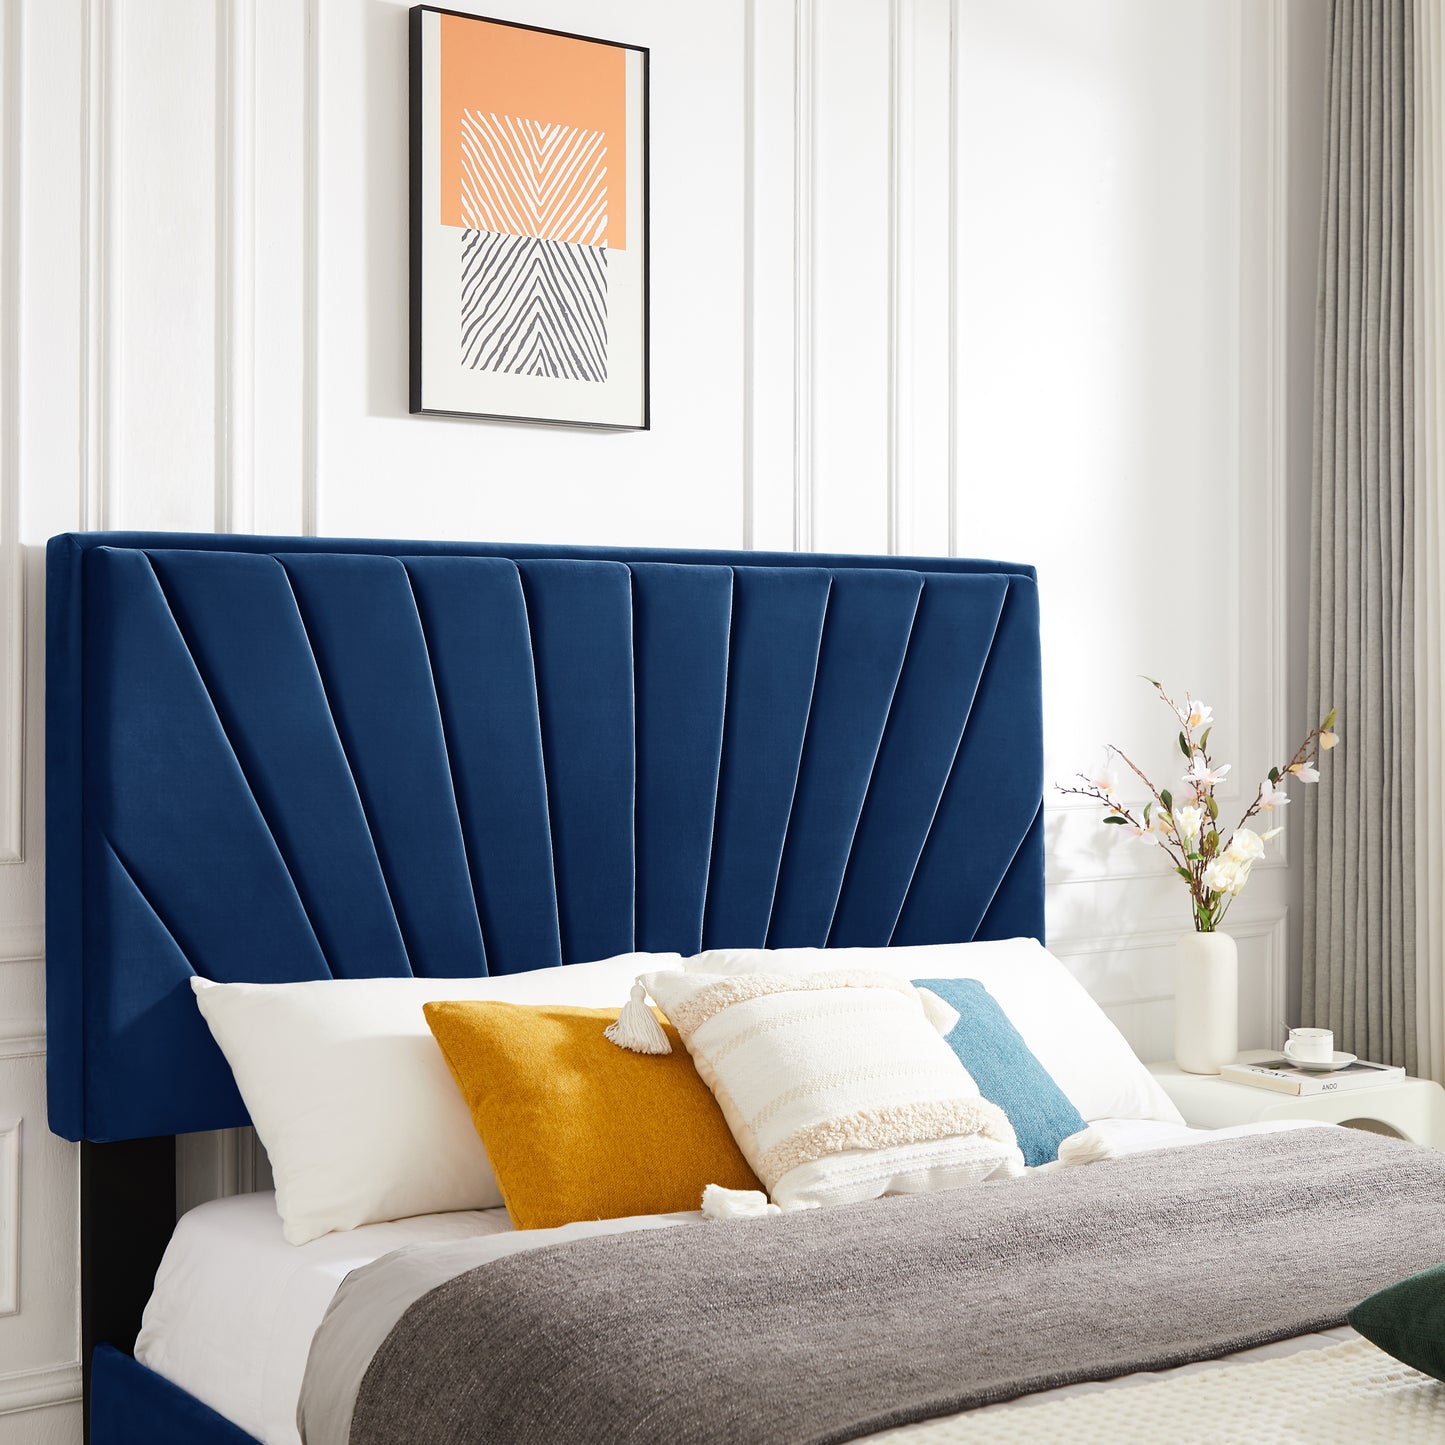 Queen bed with two nightstands, Beautiful line stripe cushion headboard, strong wooden slats + metal legs with Electroplate